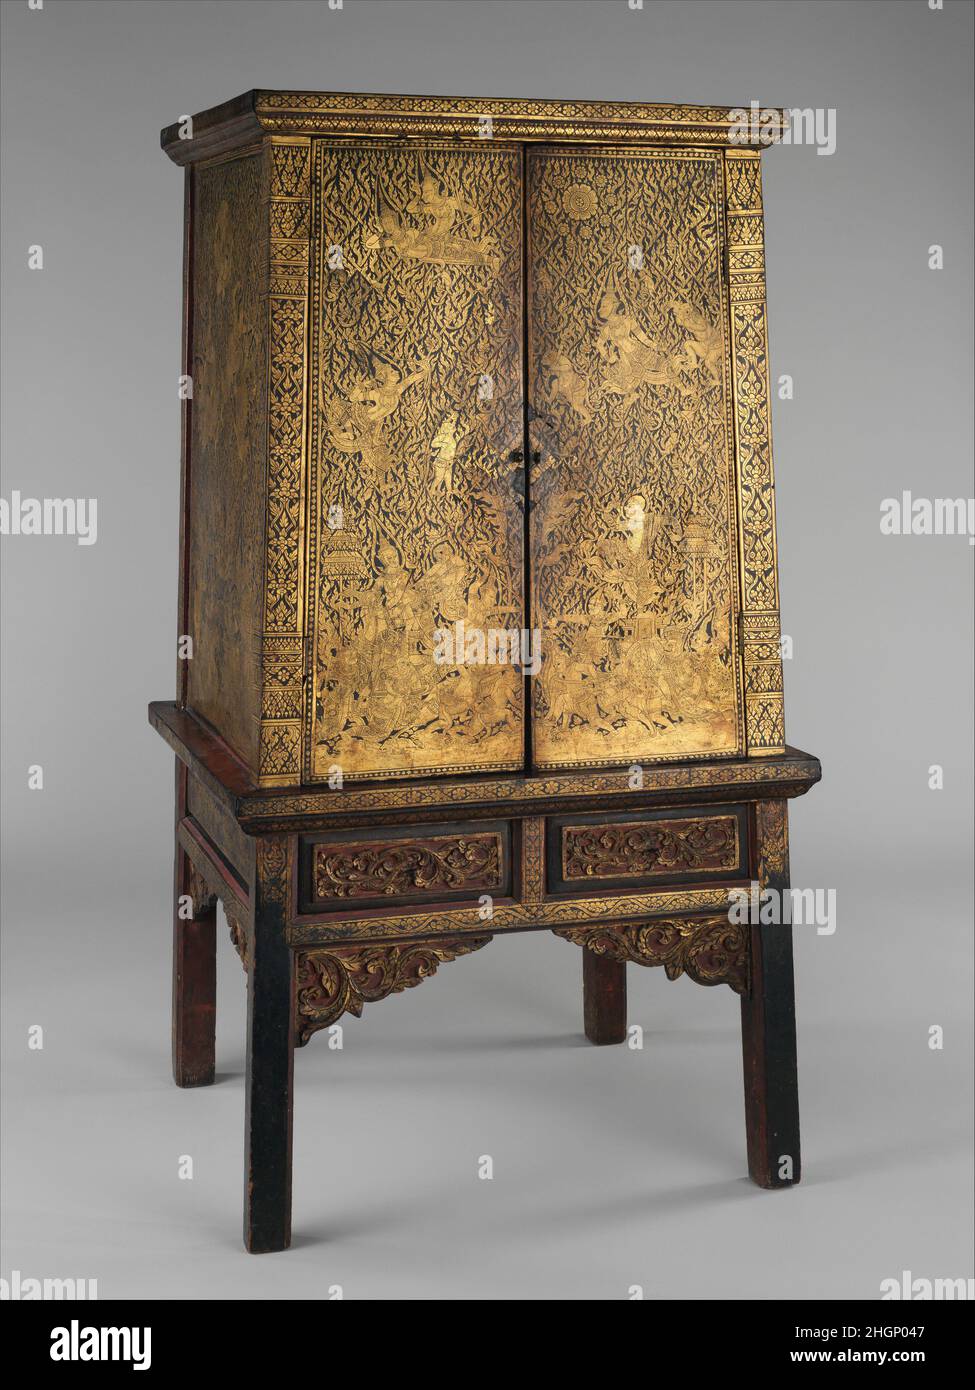 Manuscript Storage Cabinet late 18th–early 19th century Thailand (Bangkok) Cabinets of this type were traditionally gifted to monasteries where they served to house and preserve the sacred scriptures written on palm-leaf manuscripts, and associated Buddhist texts often on khoi paper, such as those narrating the adventures of the venerable monk Pra Malai. These cabinets were richly decorated with gold on lacquer ground in a technique known as Lai Rod Nam. Depictions of celestial adorants was a favored subject, as was combatant scenes from the Ramakien, the Thai version of the Indian epic, the R Stock Photo